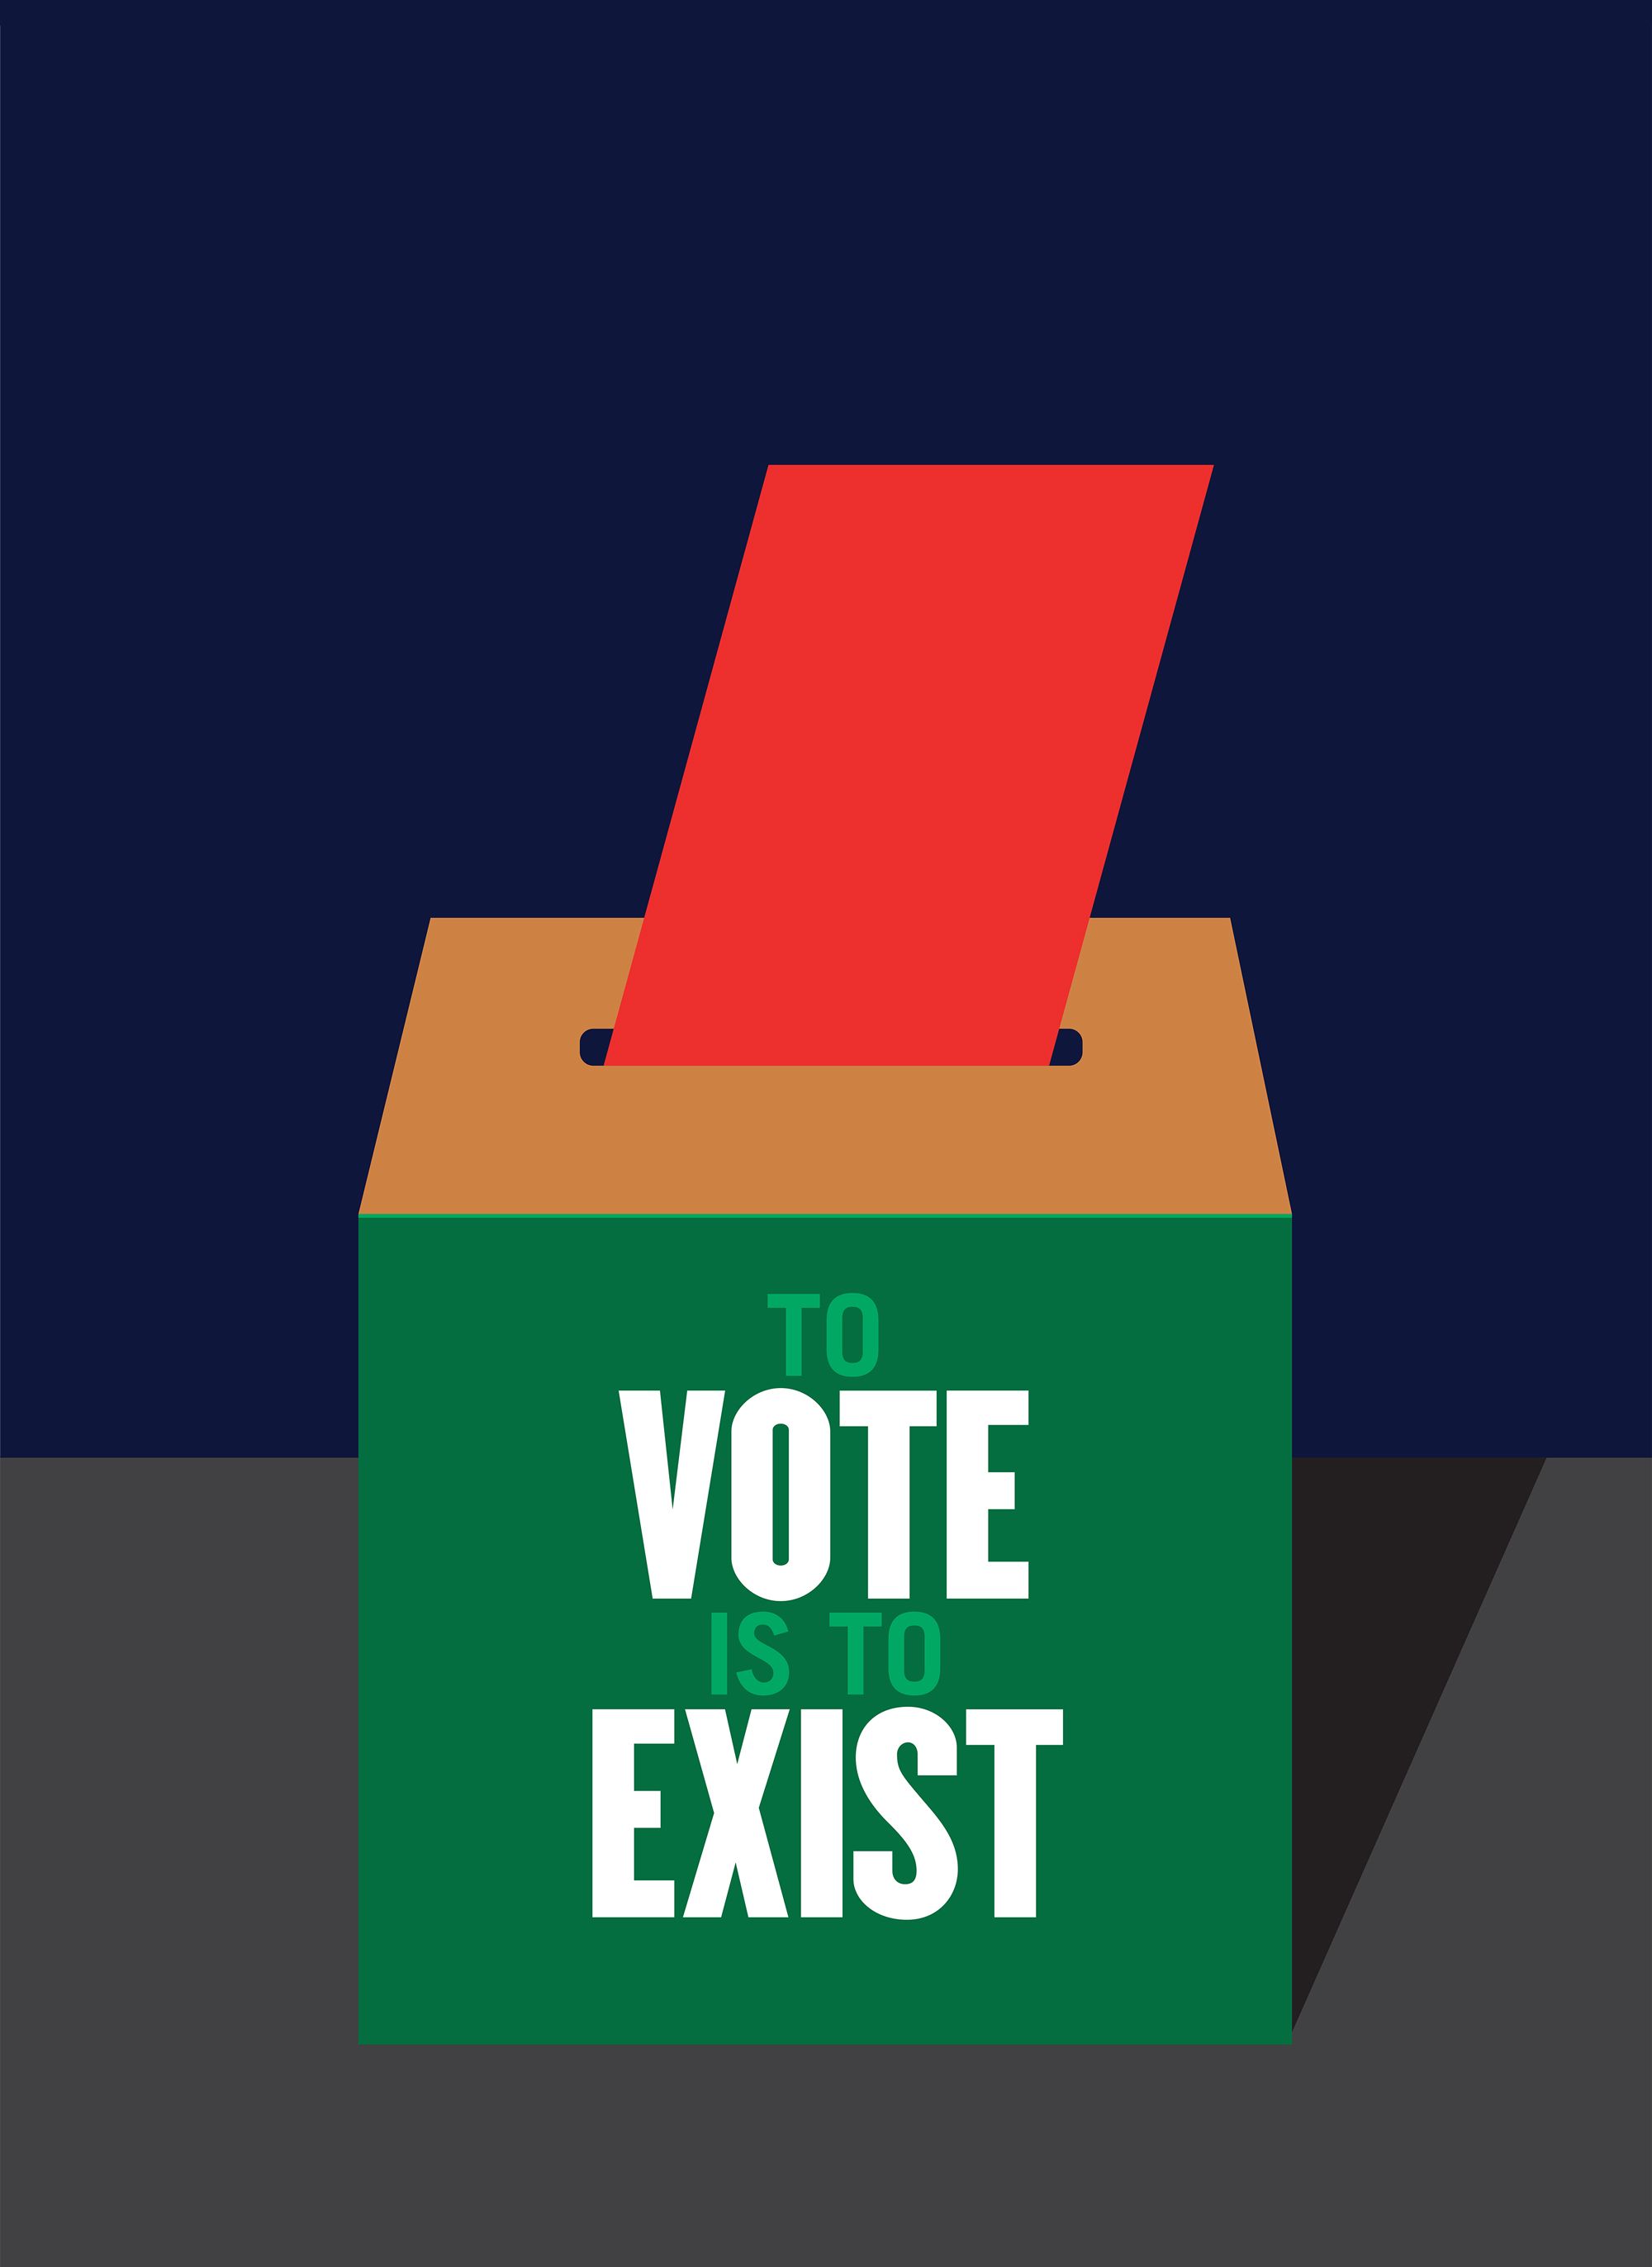 Gallery: Posters that will make you want to go vote